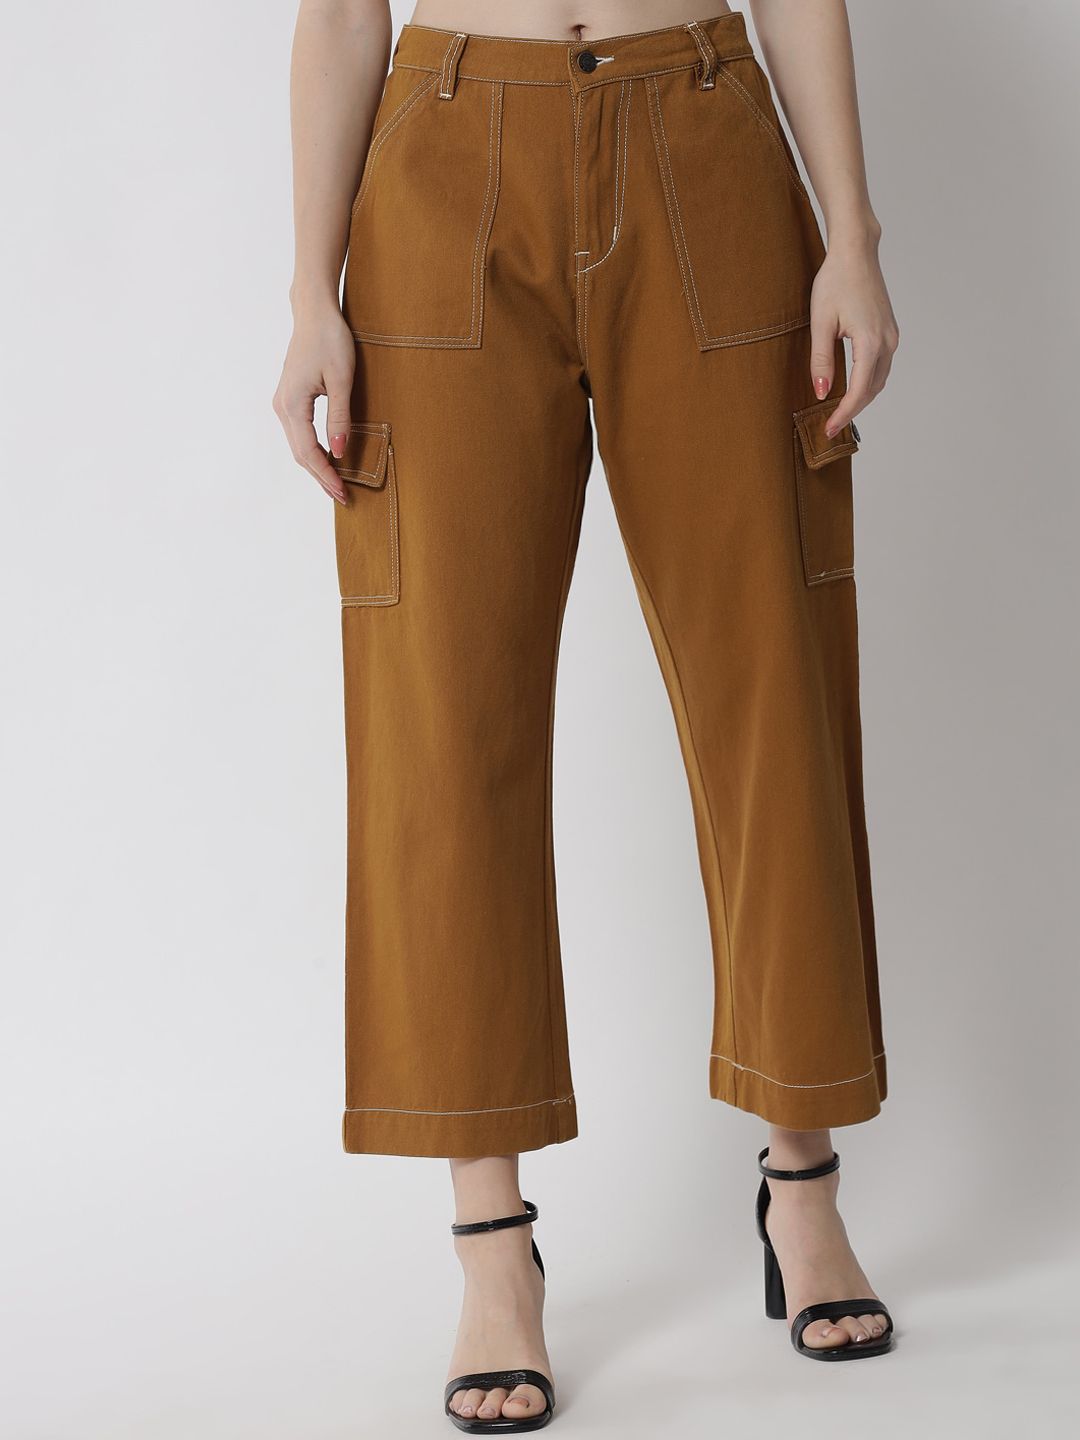 River Of Design Jeans Women Tan Wide Leg High-Rise Jeans Price in India